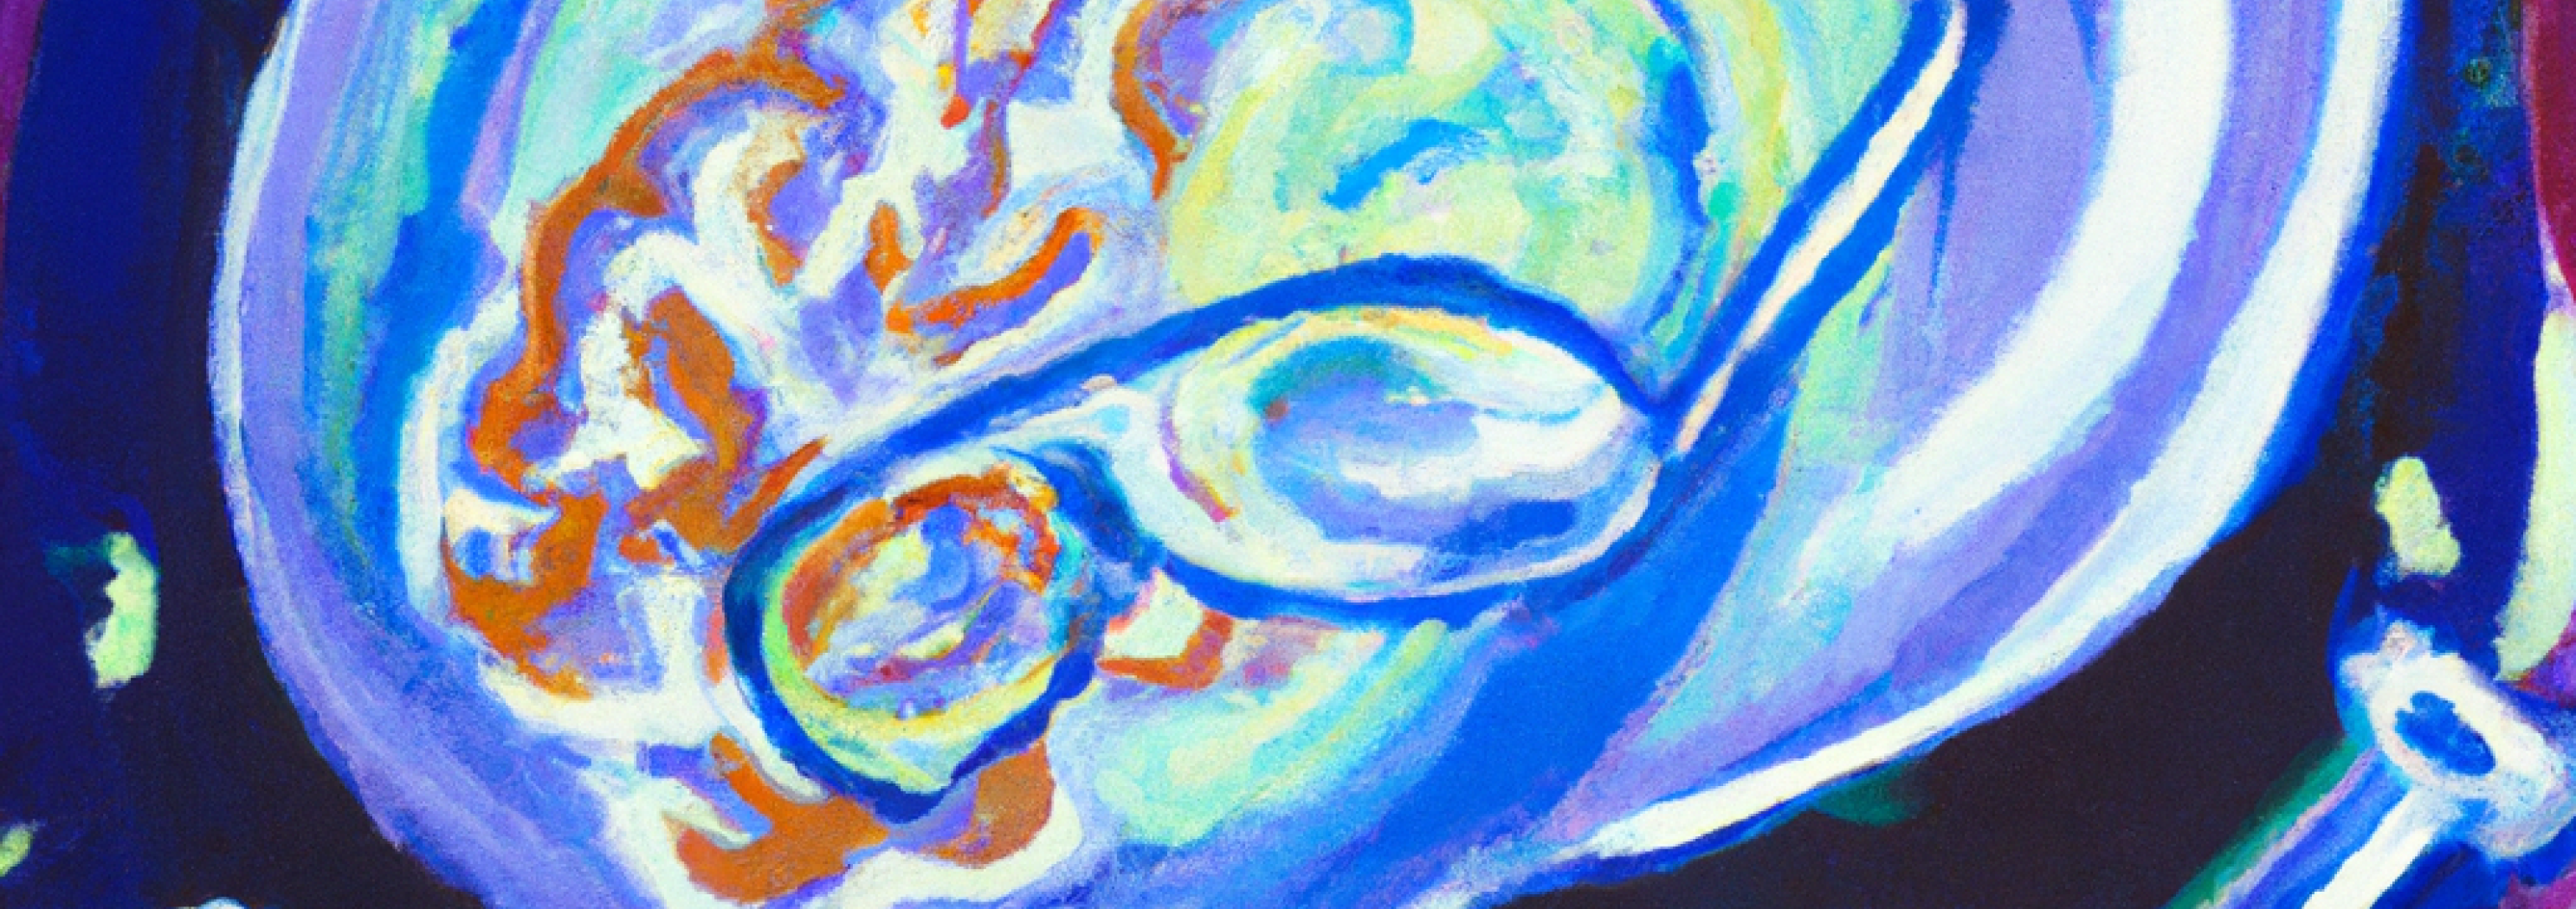 An abstract painting of a brain in space doing chemistry with vials and glasses - generated with Dall-E